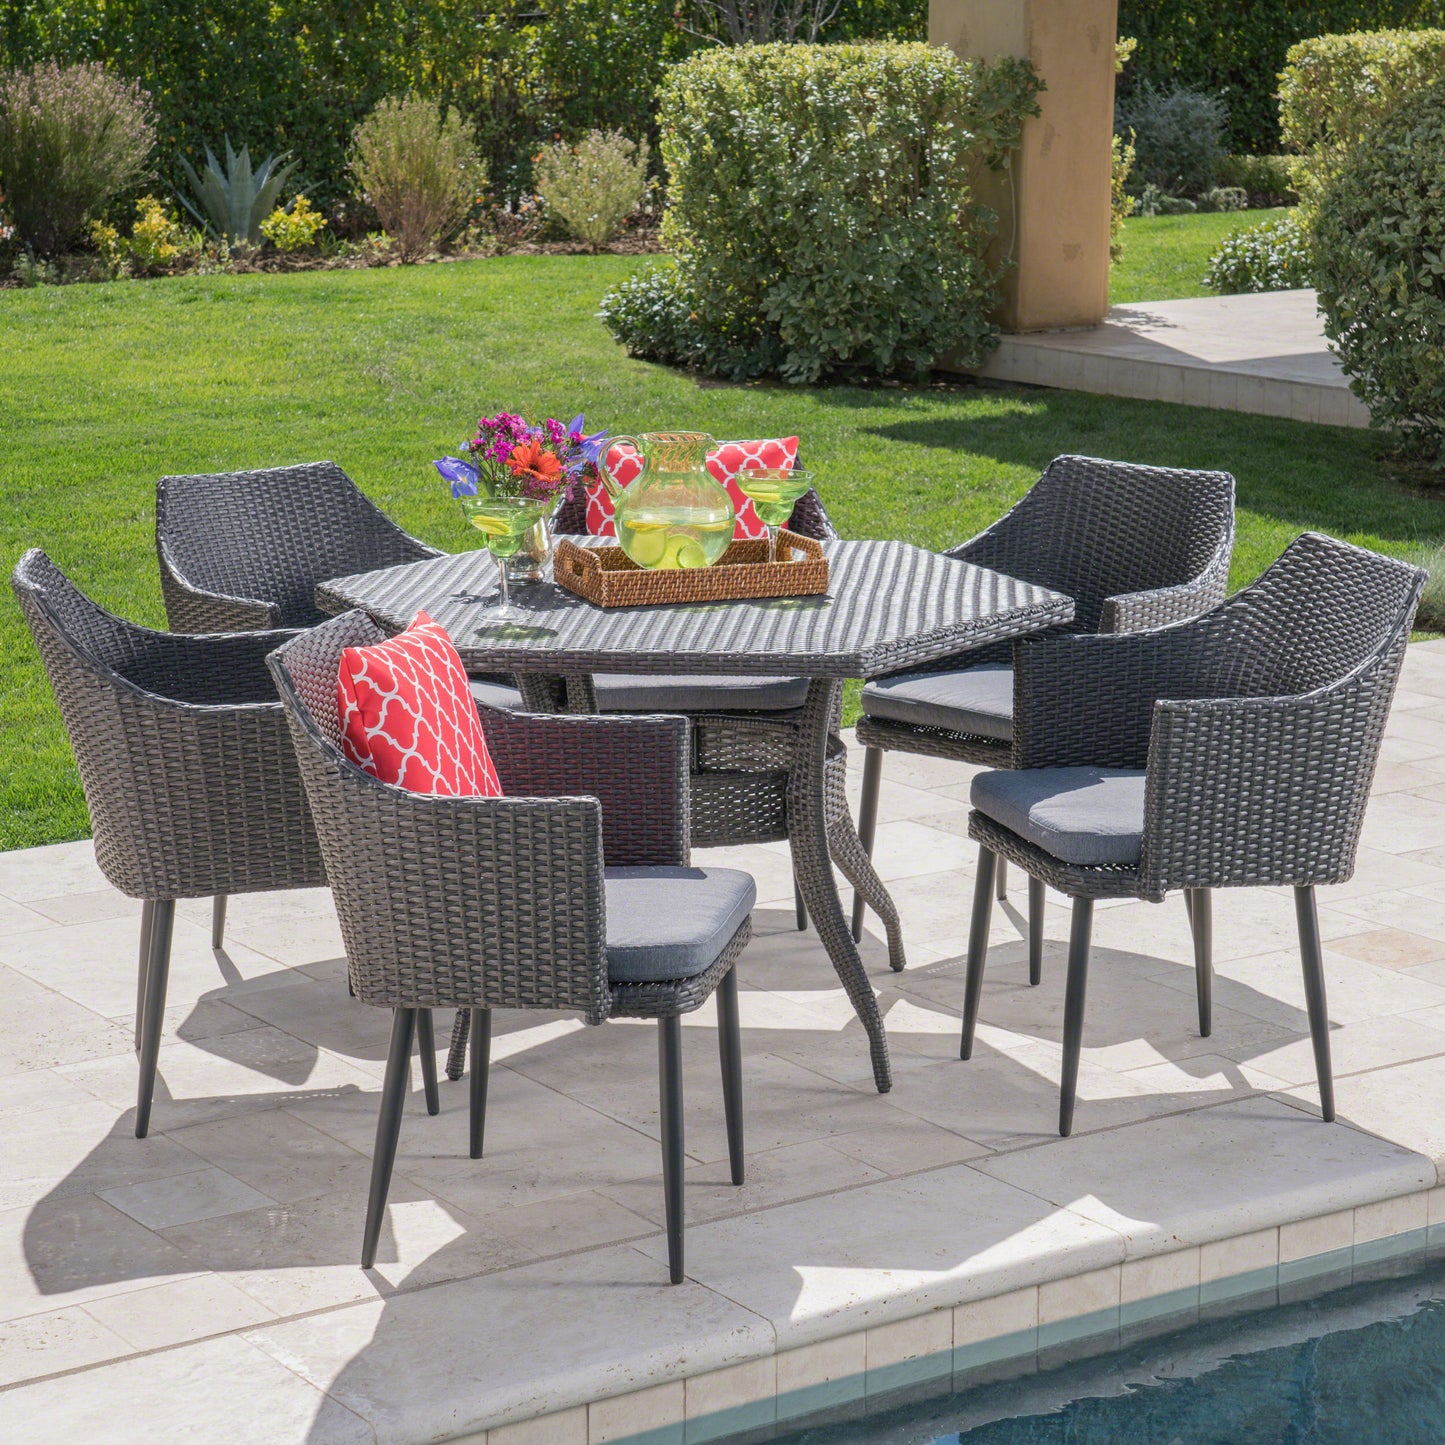 Andre Outdoor 7 Piece Wicker Hexagon Dining Set with Water Resistant Cushions